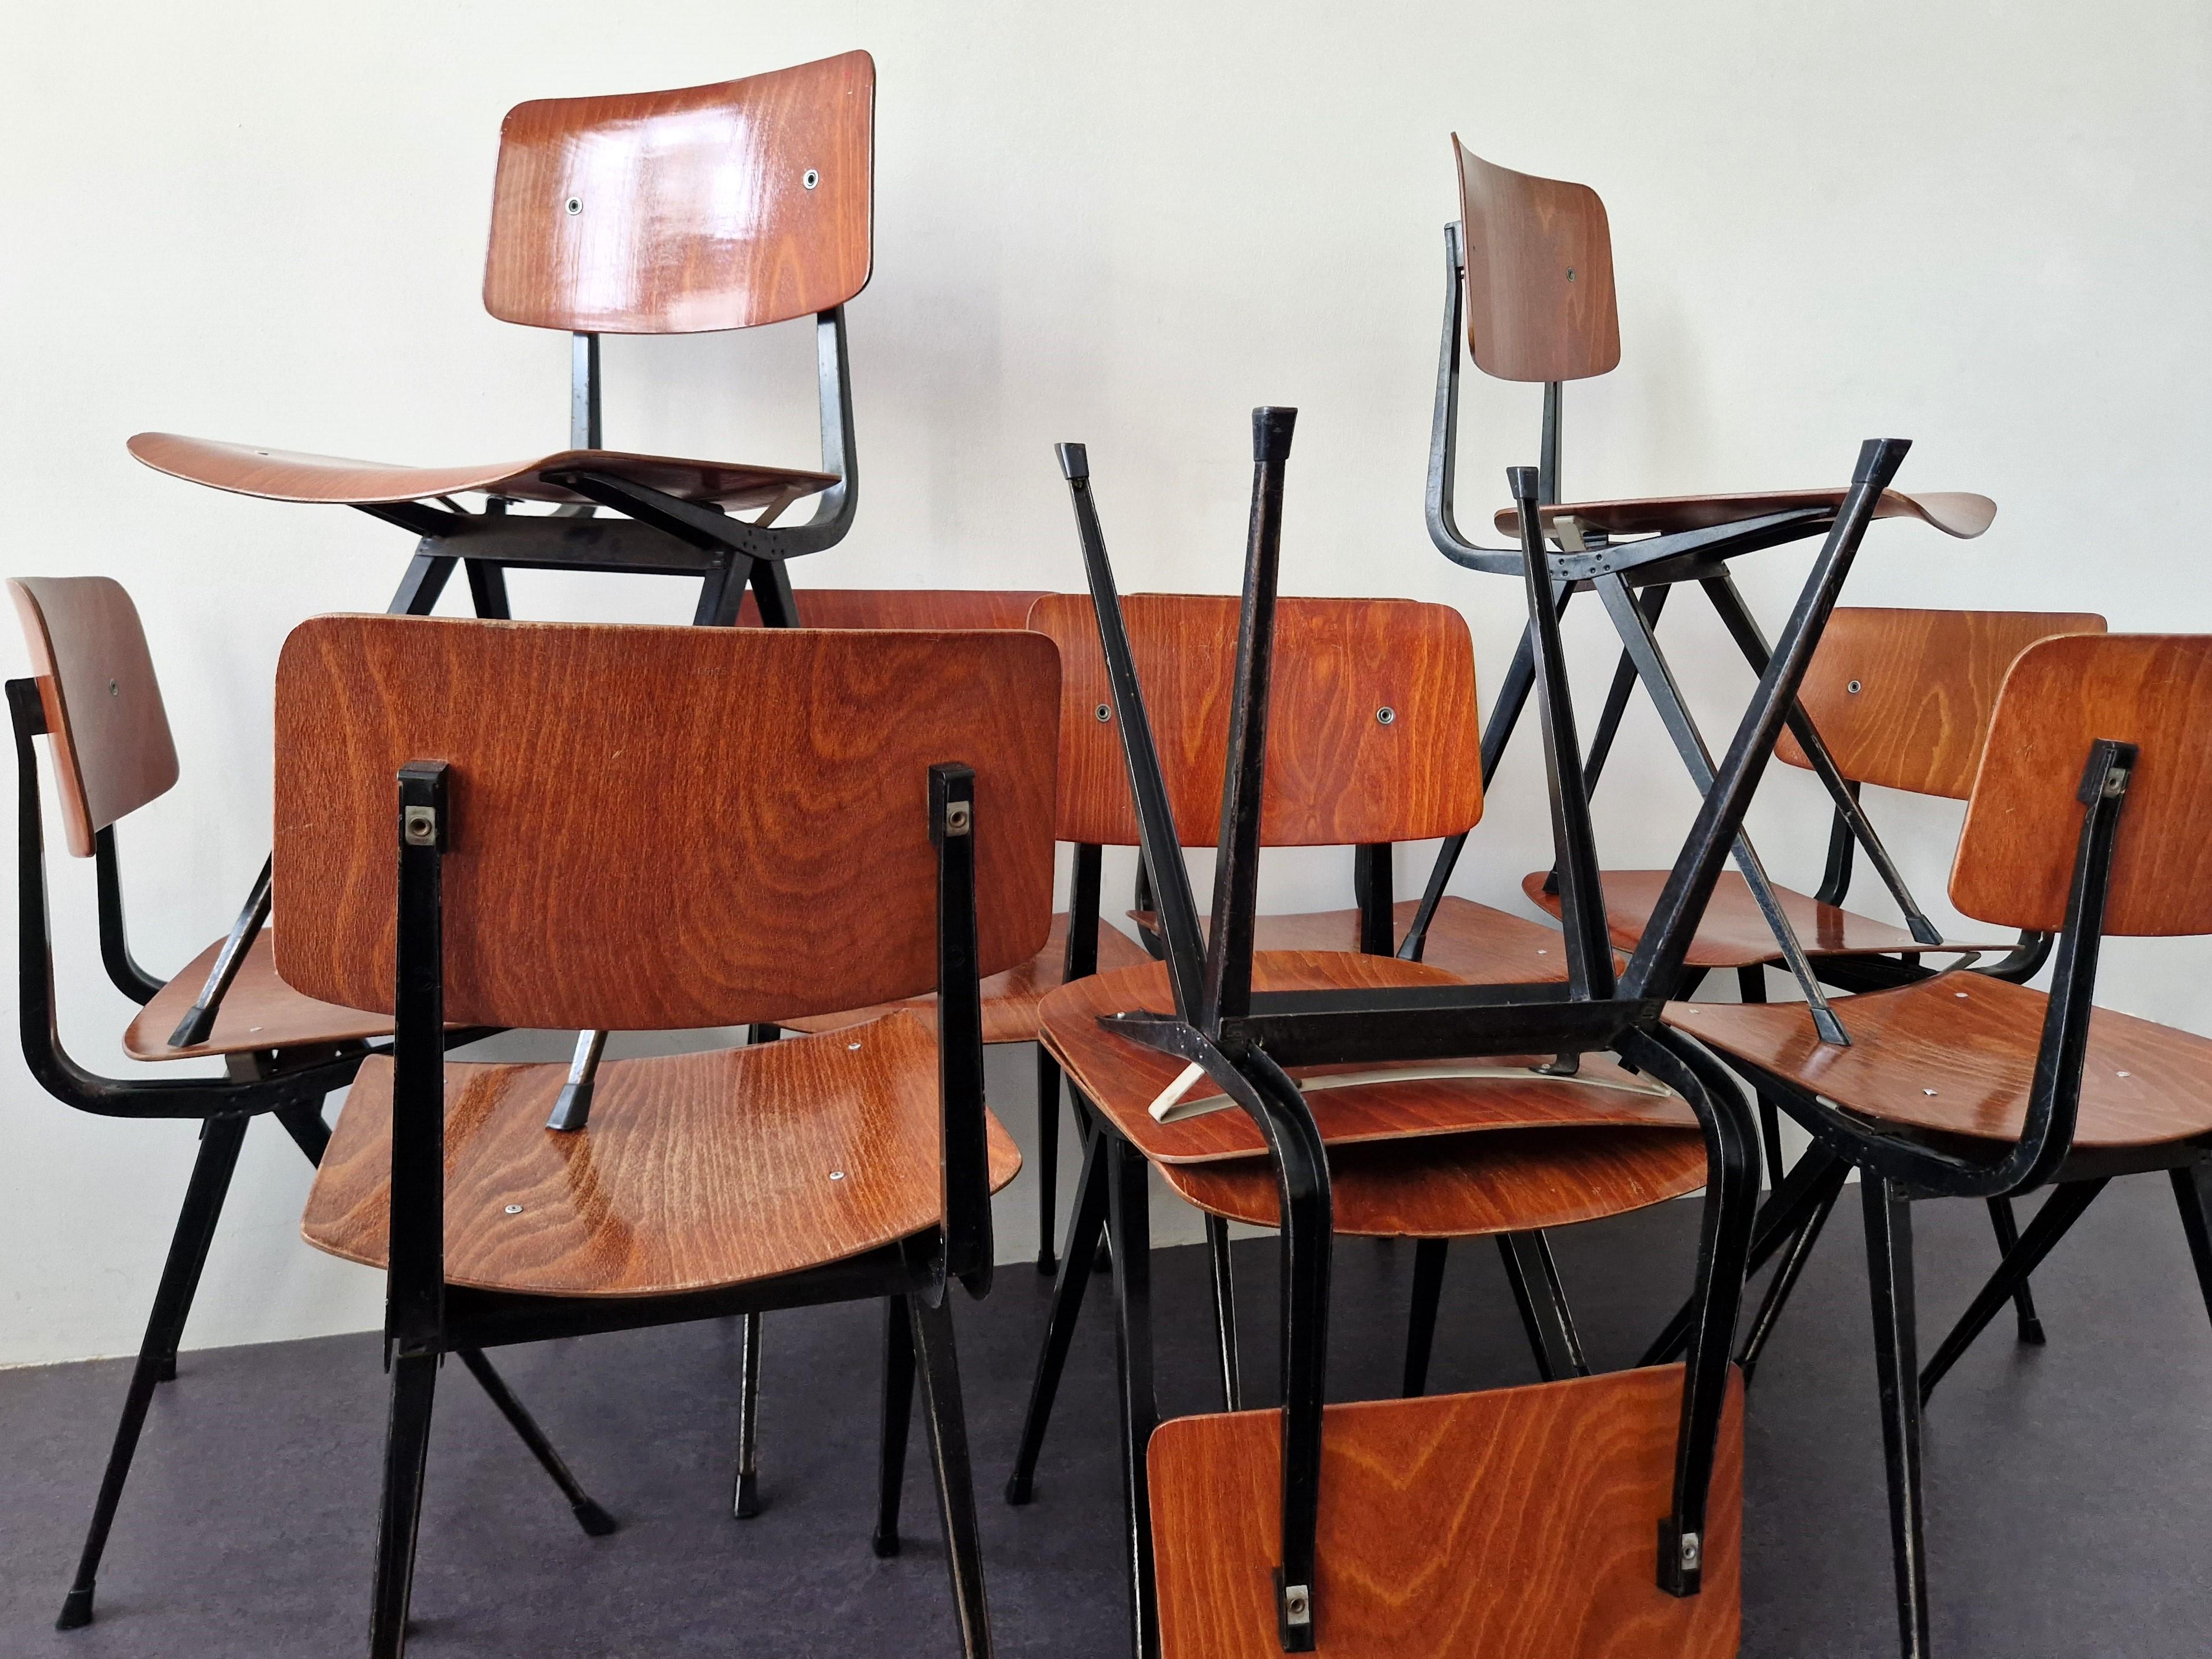 Lacquered Set of 10 Result chairs by Friso Kramer for Ahrend de Cirkel, 1960's/1970's For Sale